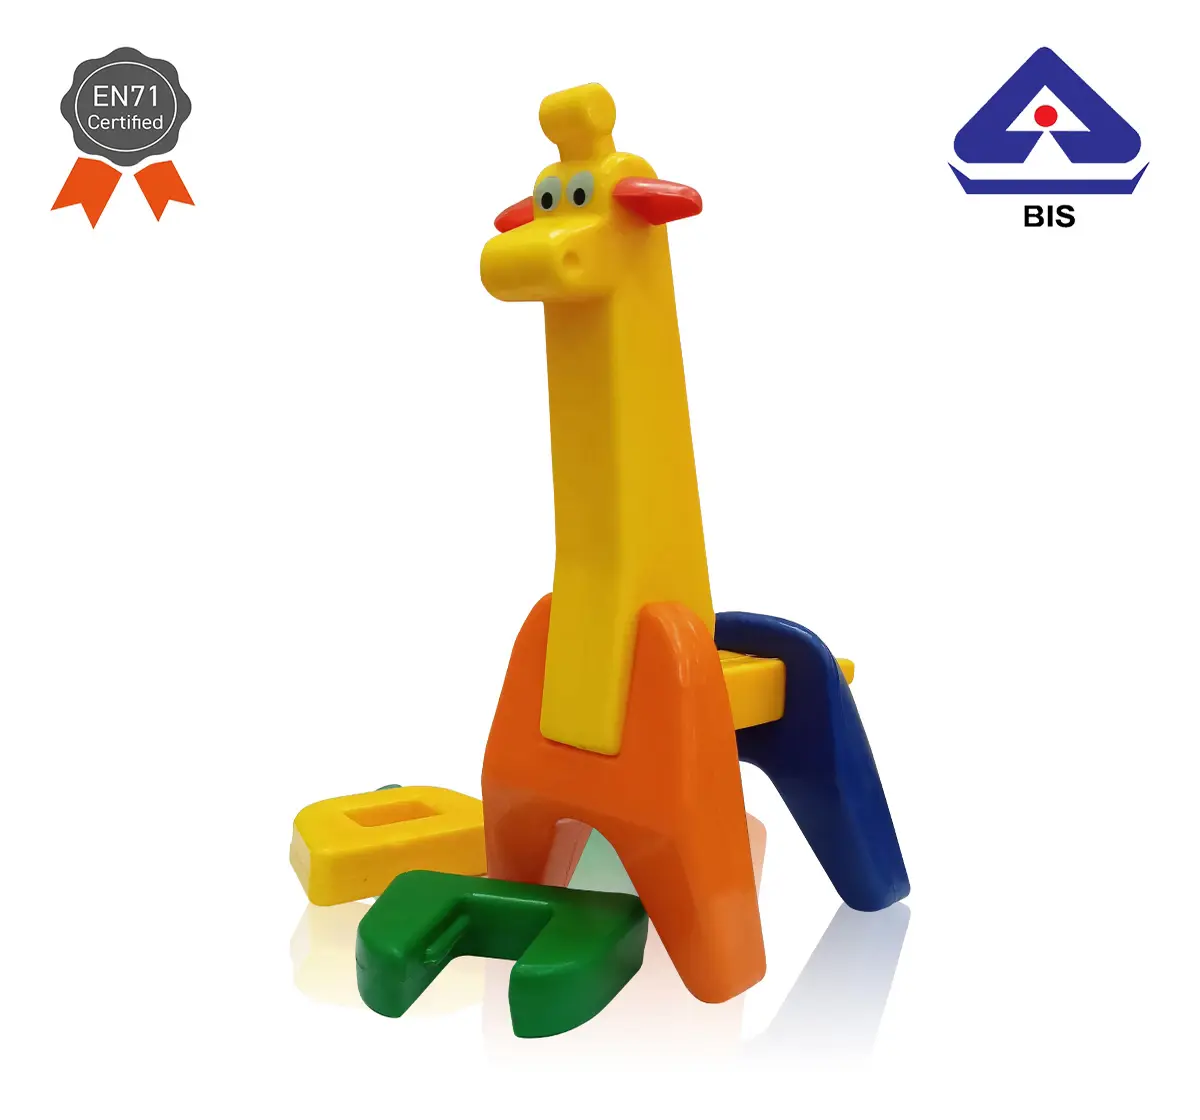 Ok Play My Pet Giraffe Toy for toddlers Plastic elephant Multicolor 18M+